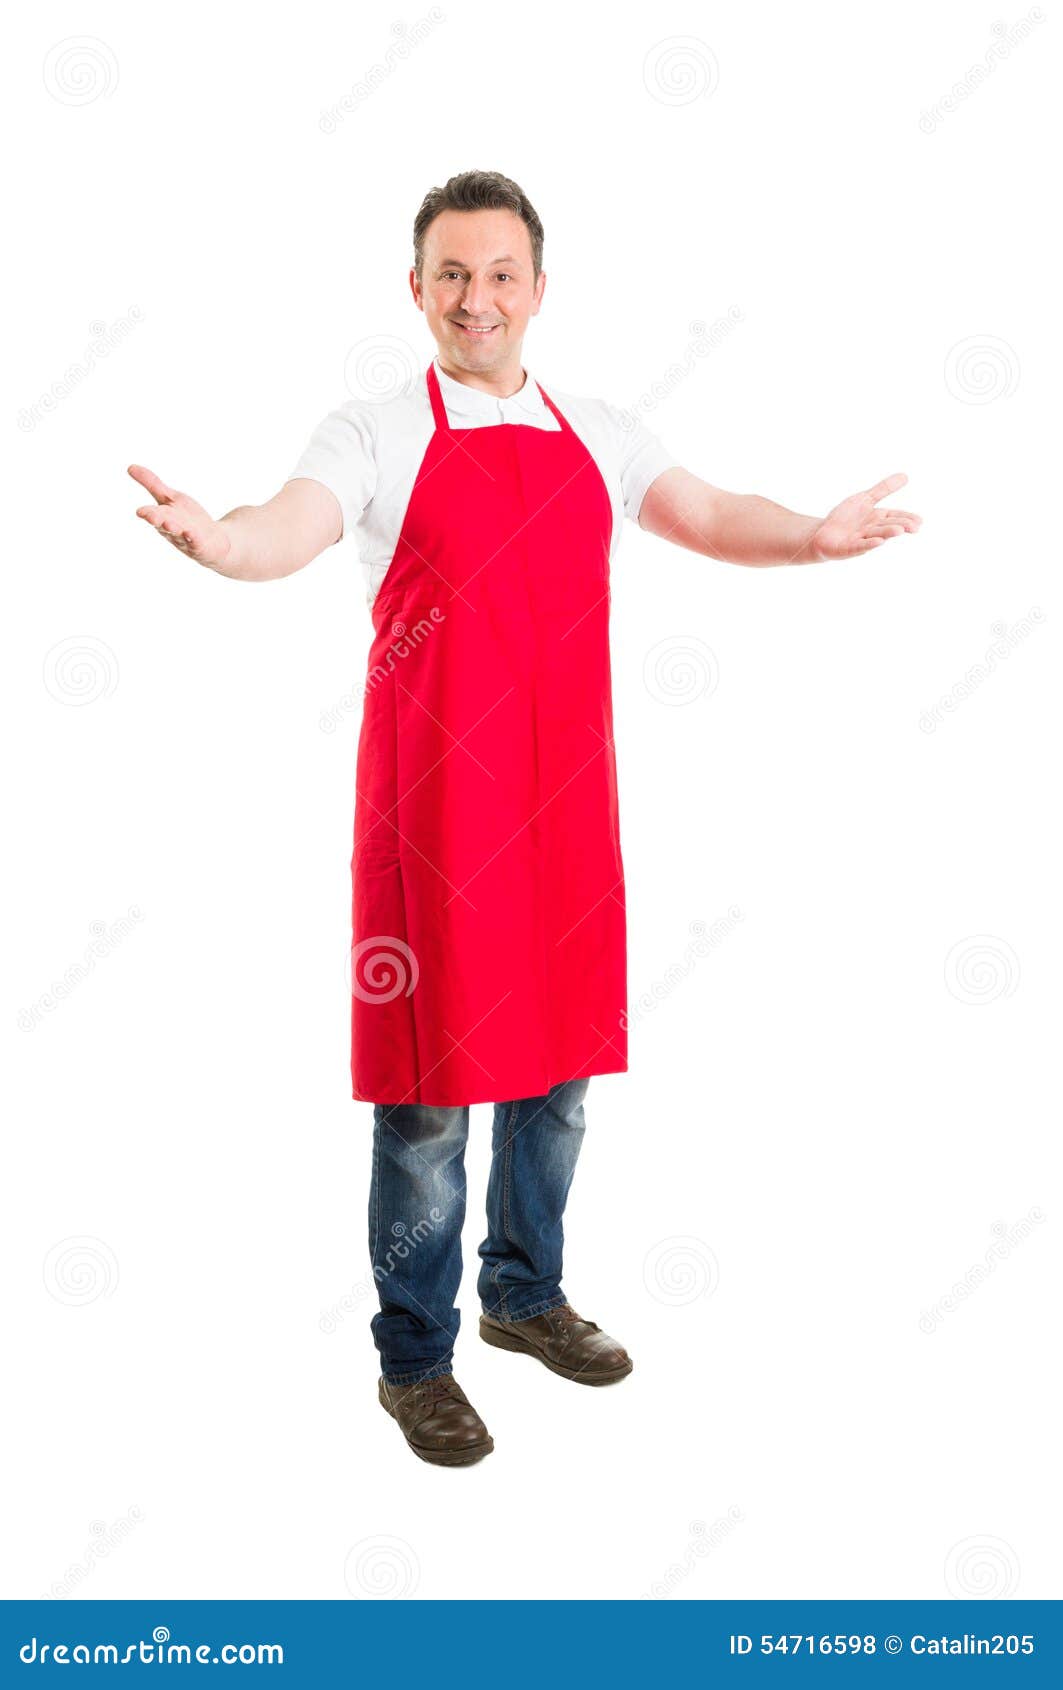 friendly hypermarket employee with arms wide open